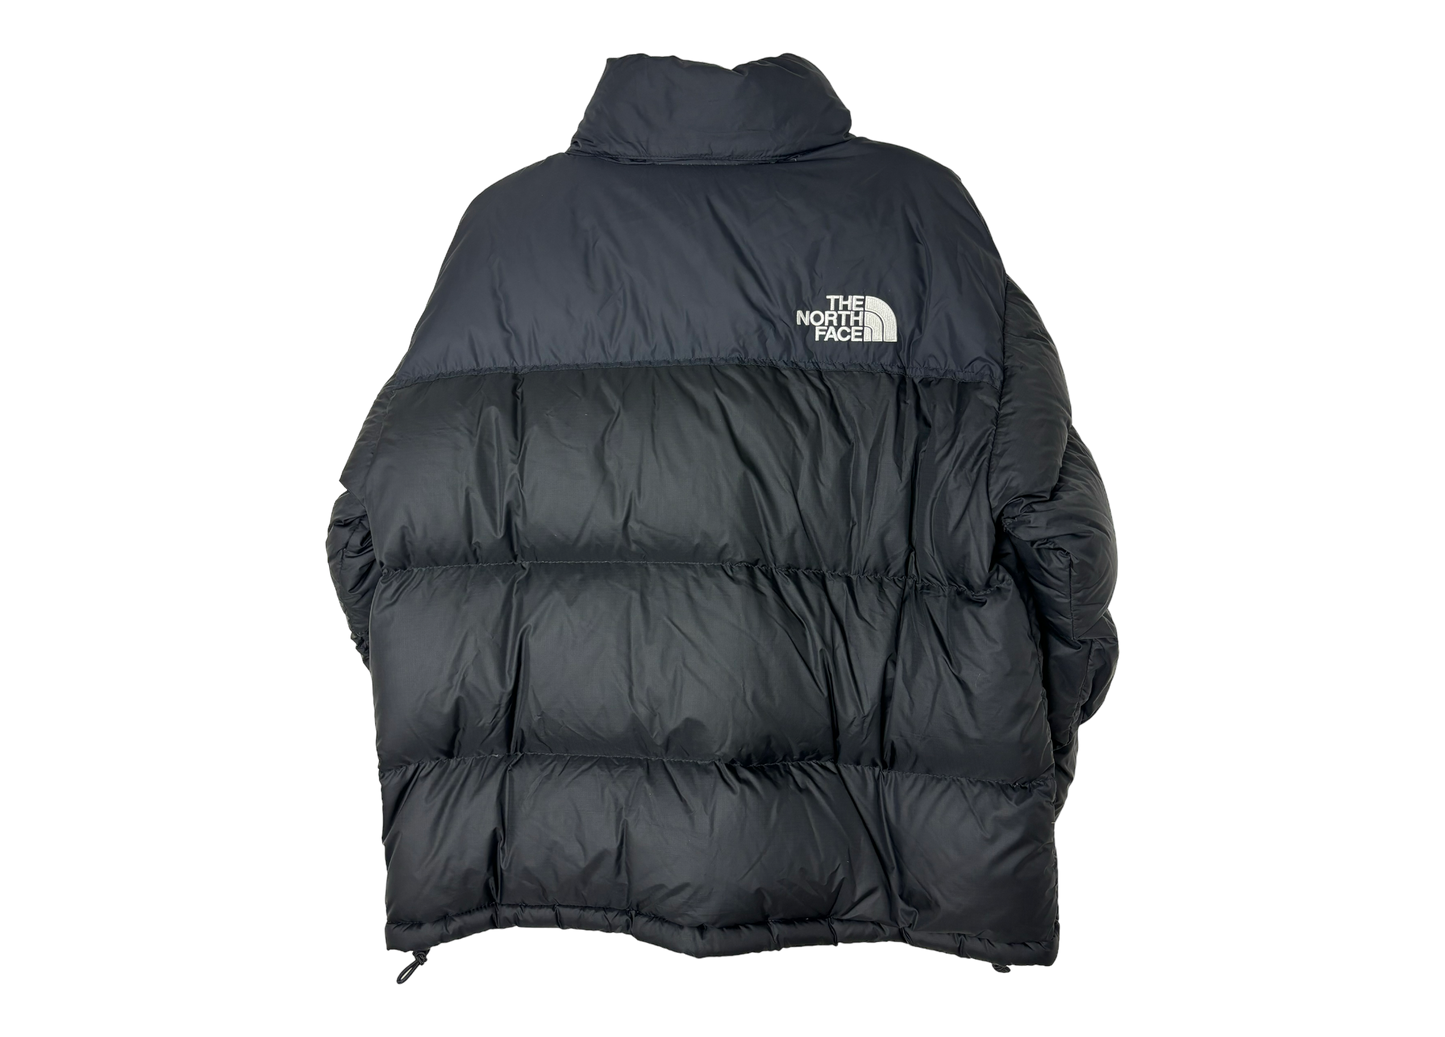 The North Face Puffer Jacket 700 COND 9/10